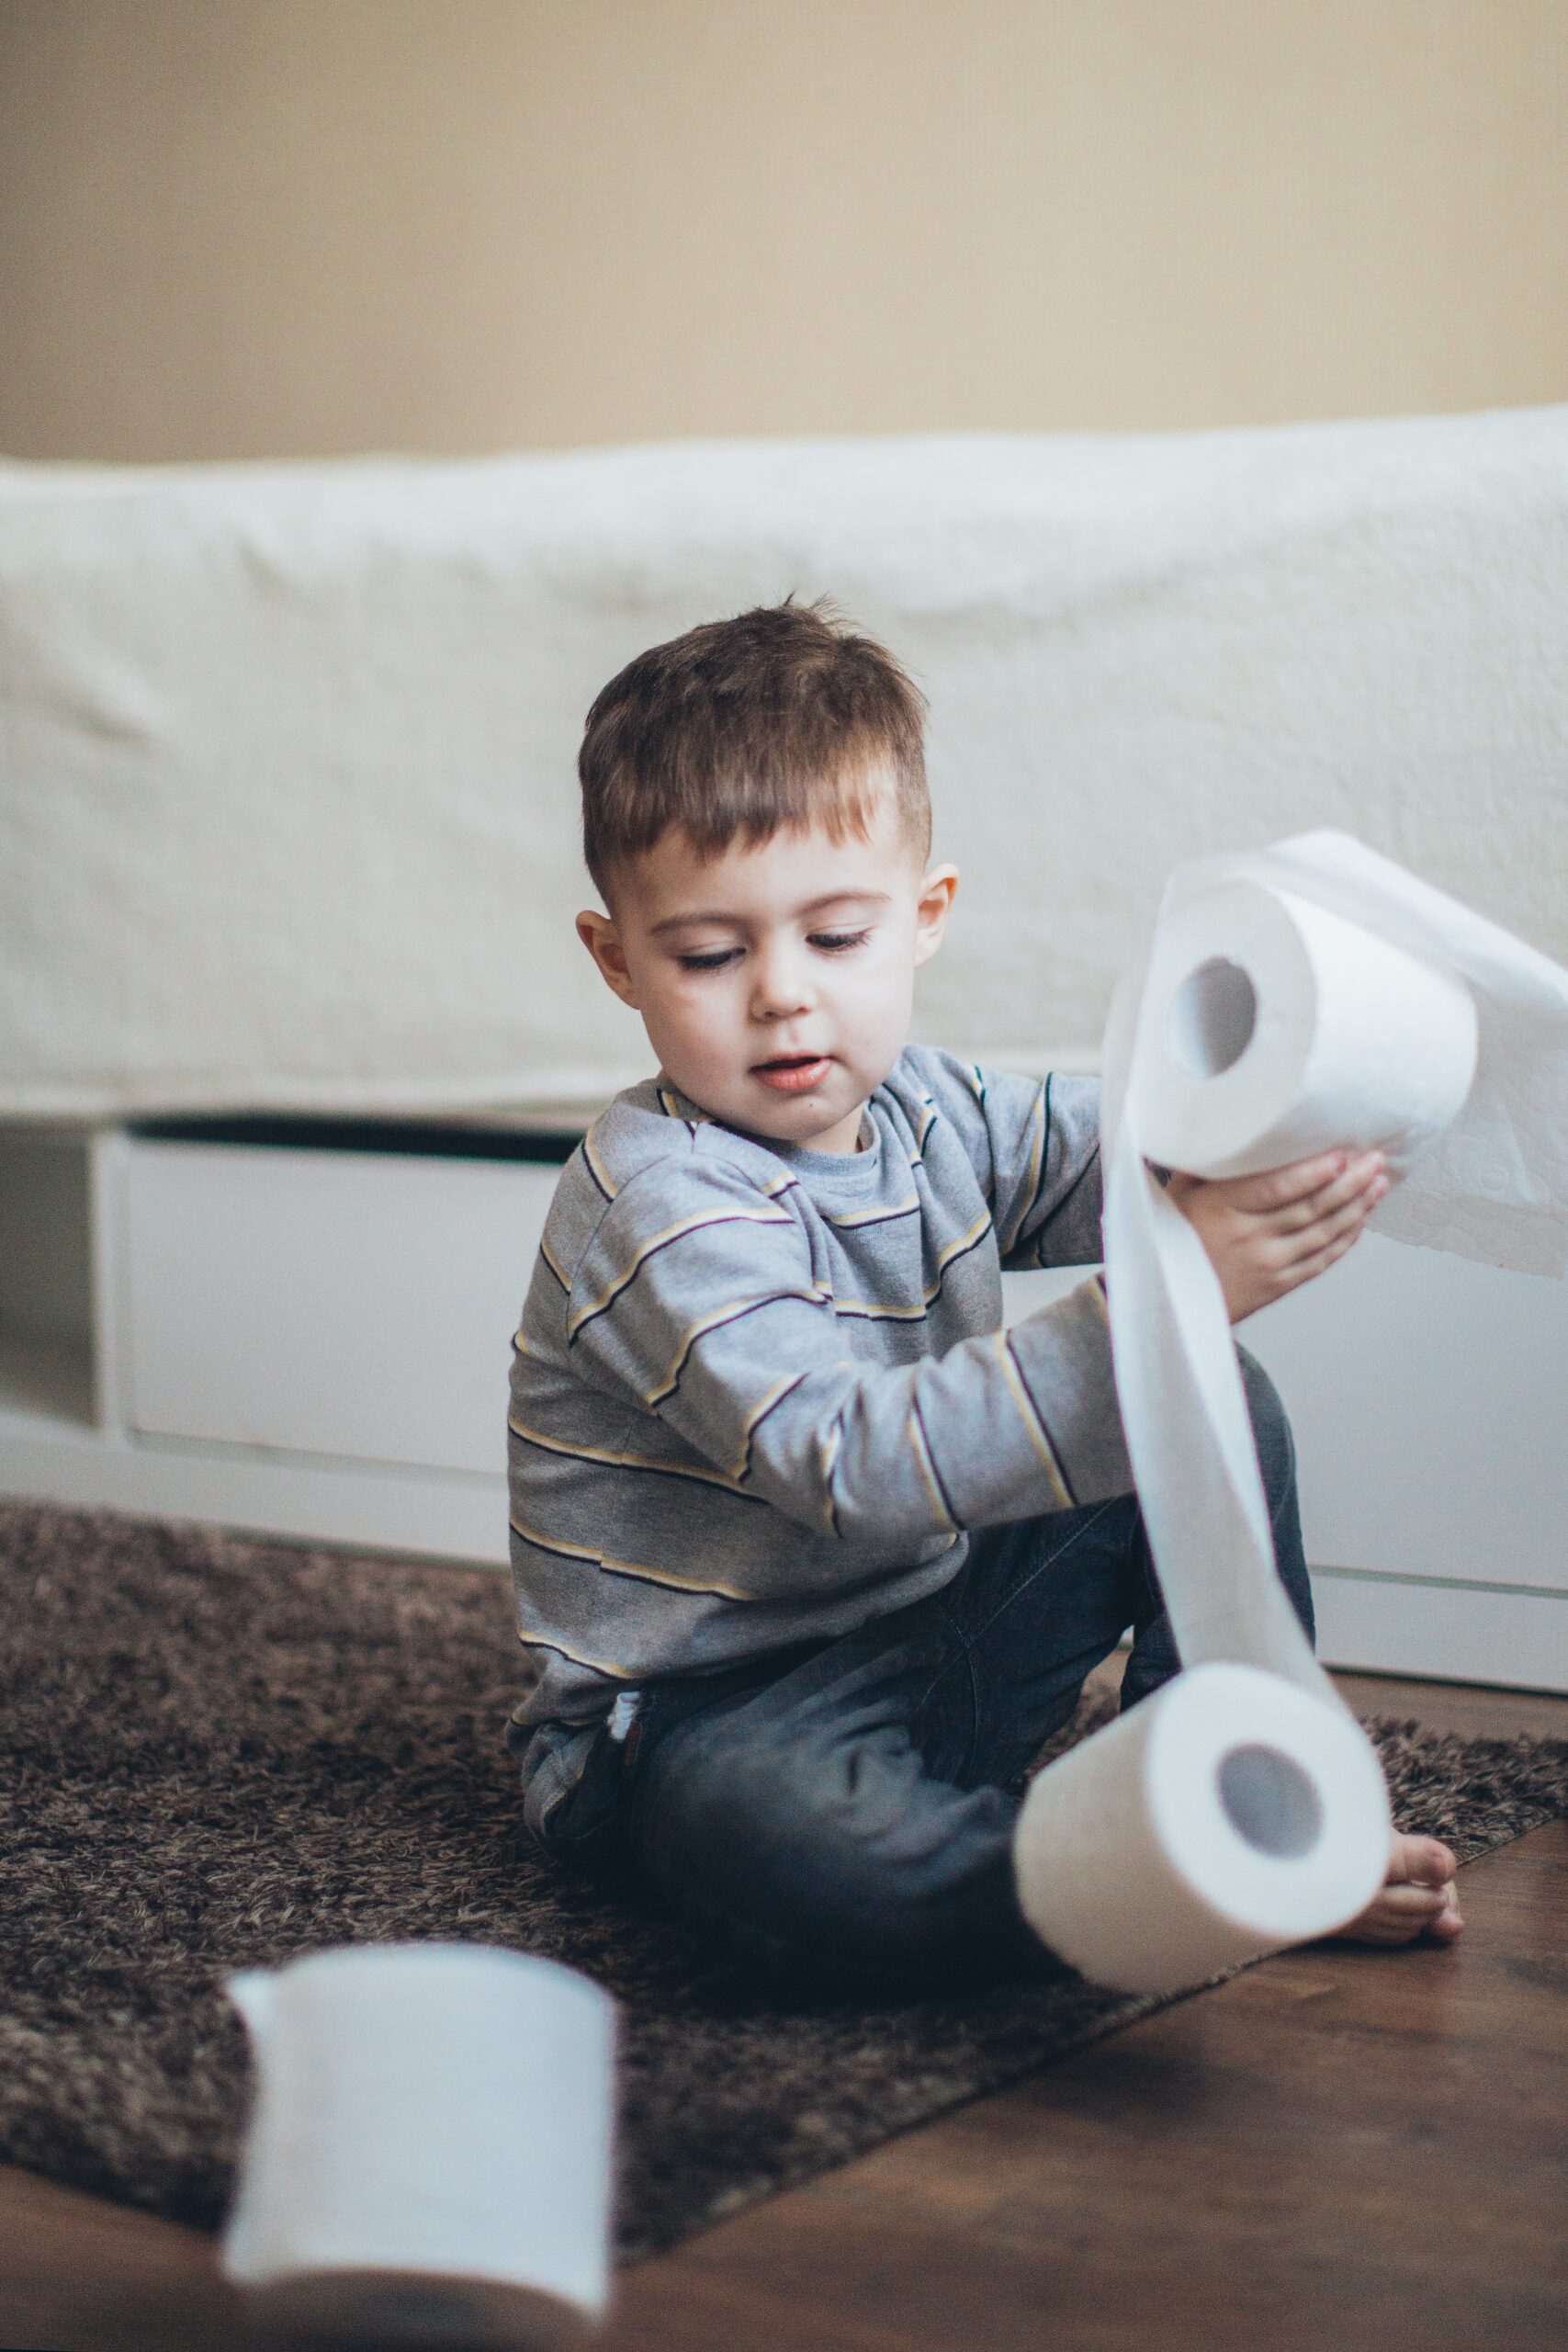 When Should a Kid Be Potty Trained